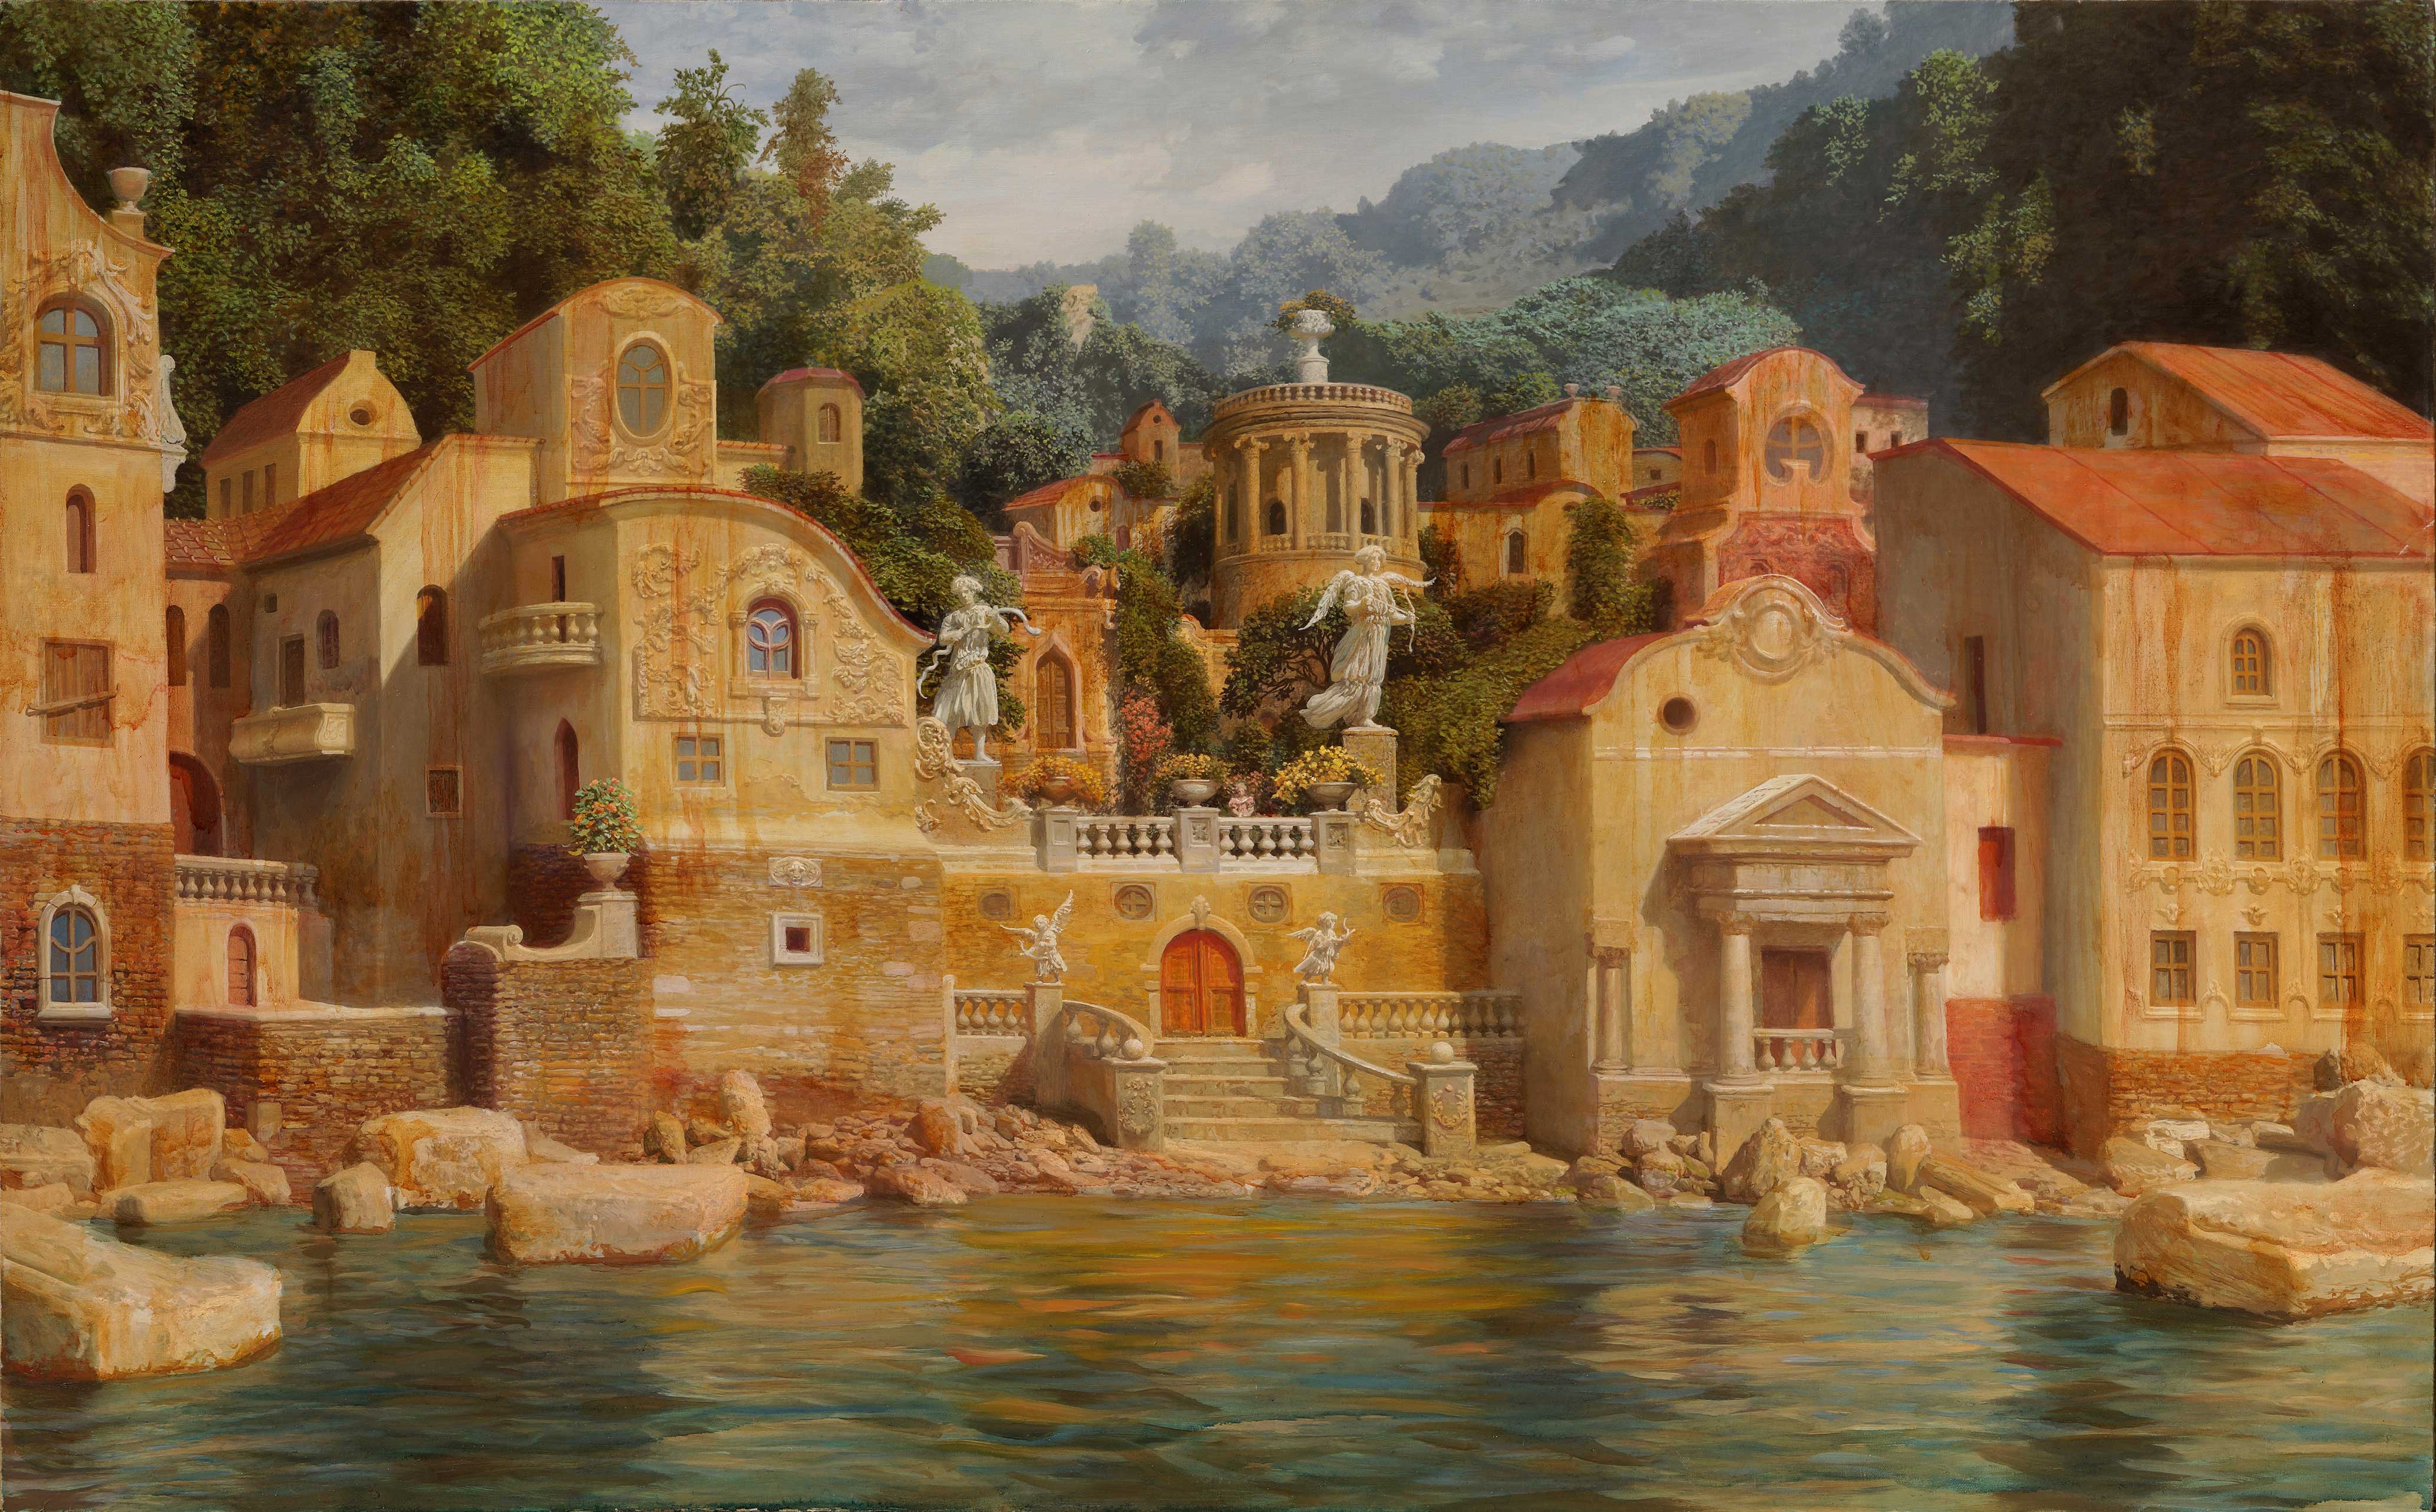 The Yellow City - 1, Alexander Saidov, Buy the painting Oil